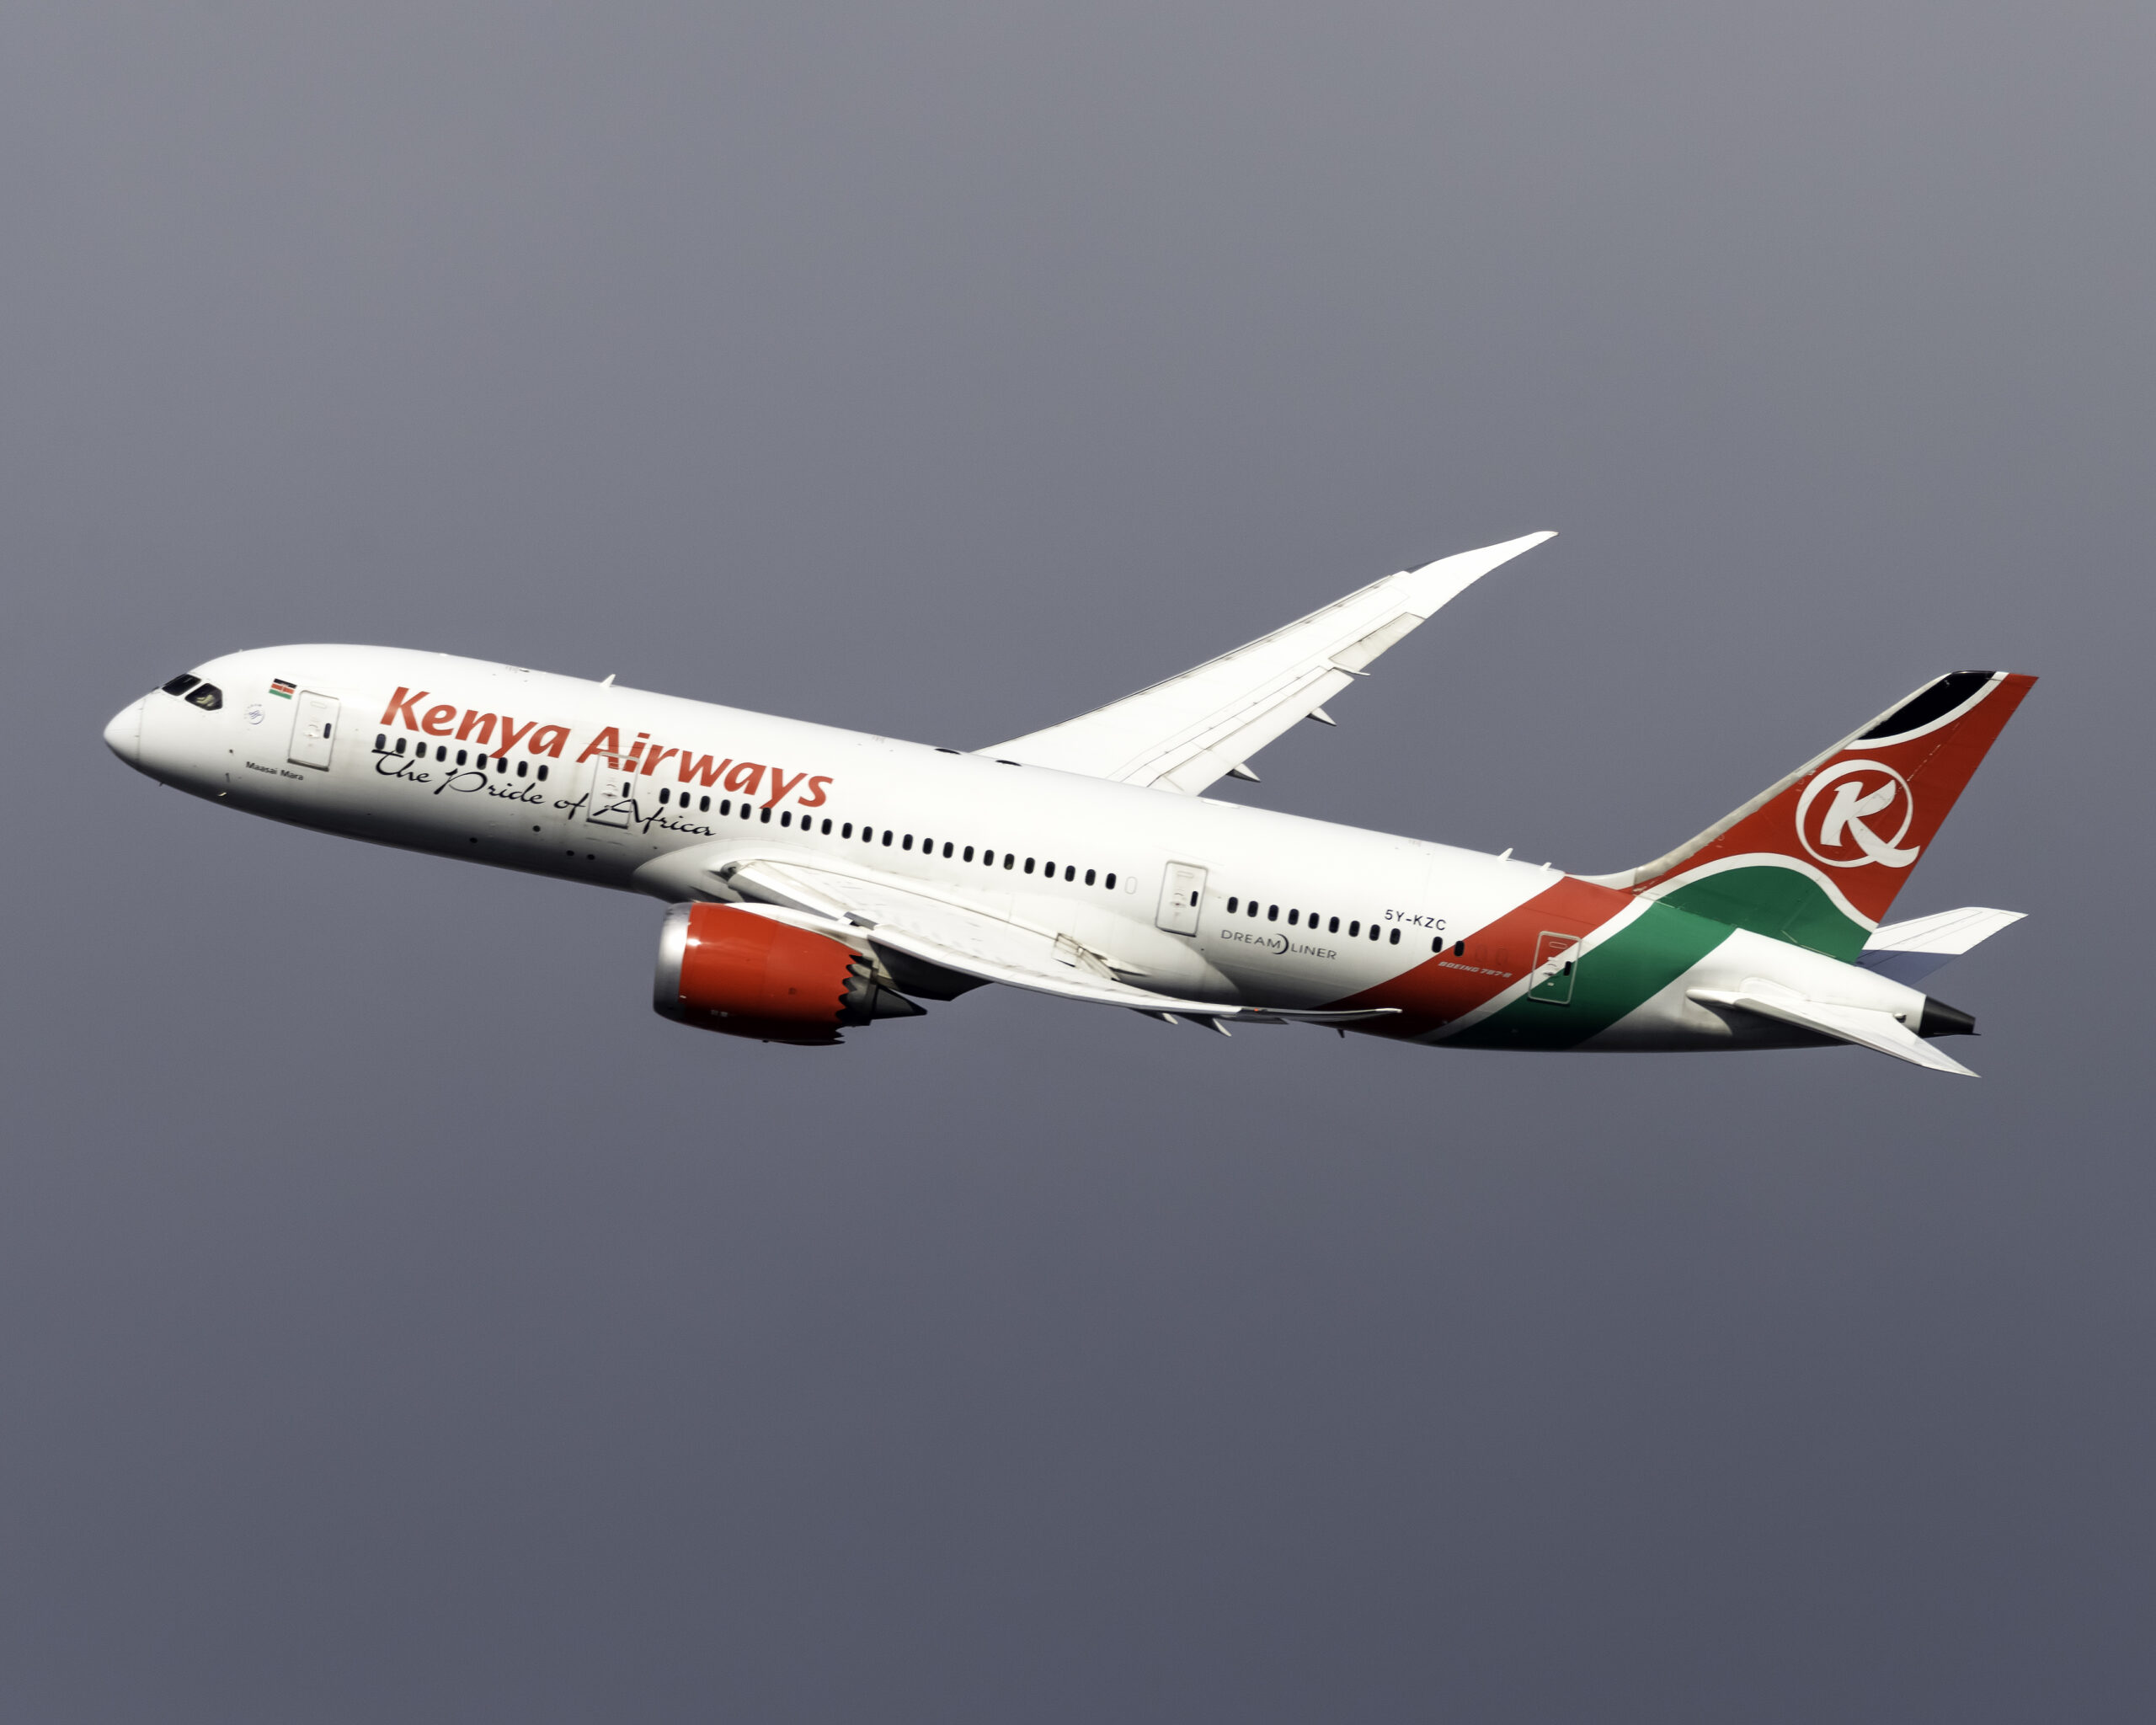 Kenya Airways Partners With South Africa’s Airlink